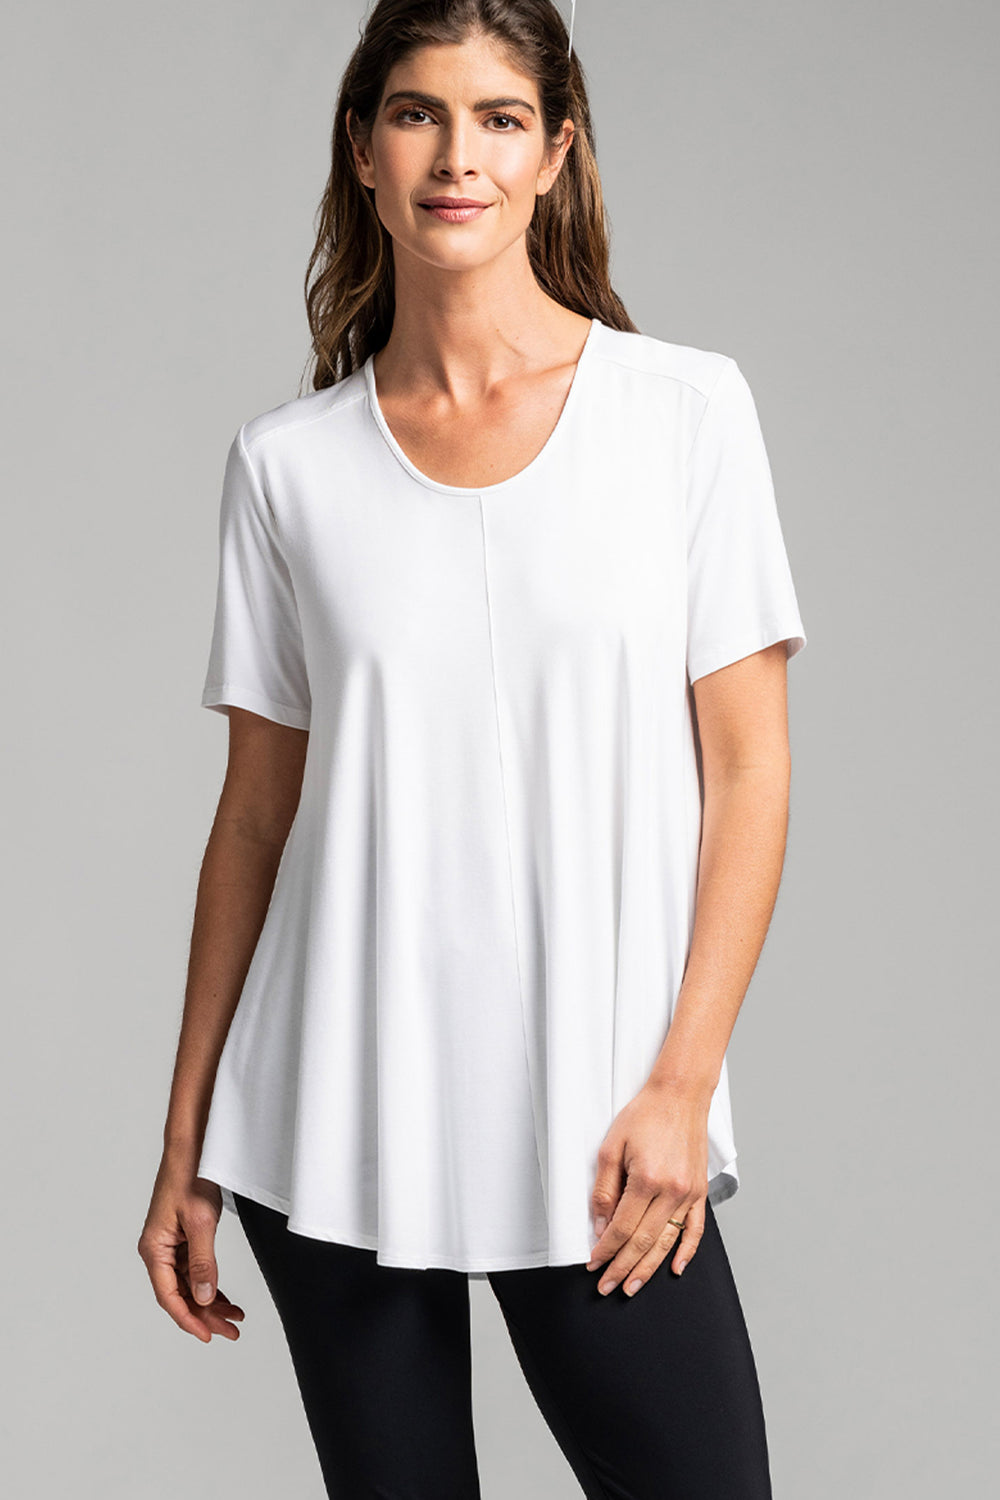 Essentials Women's Relaxed-Fit Short-Sleeve Scoopneck Swing T-Shirt  (Available in Plus Size)